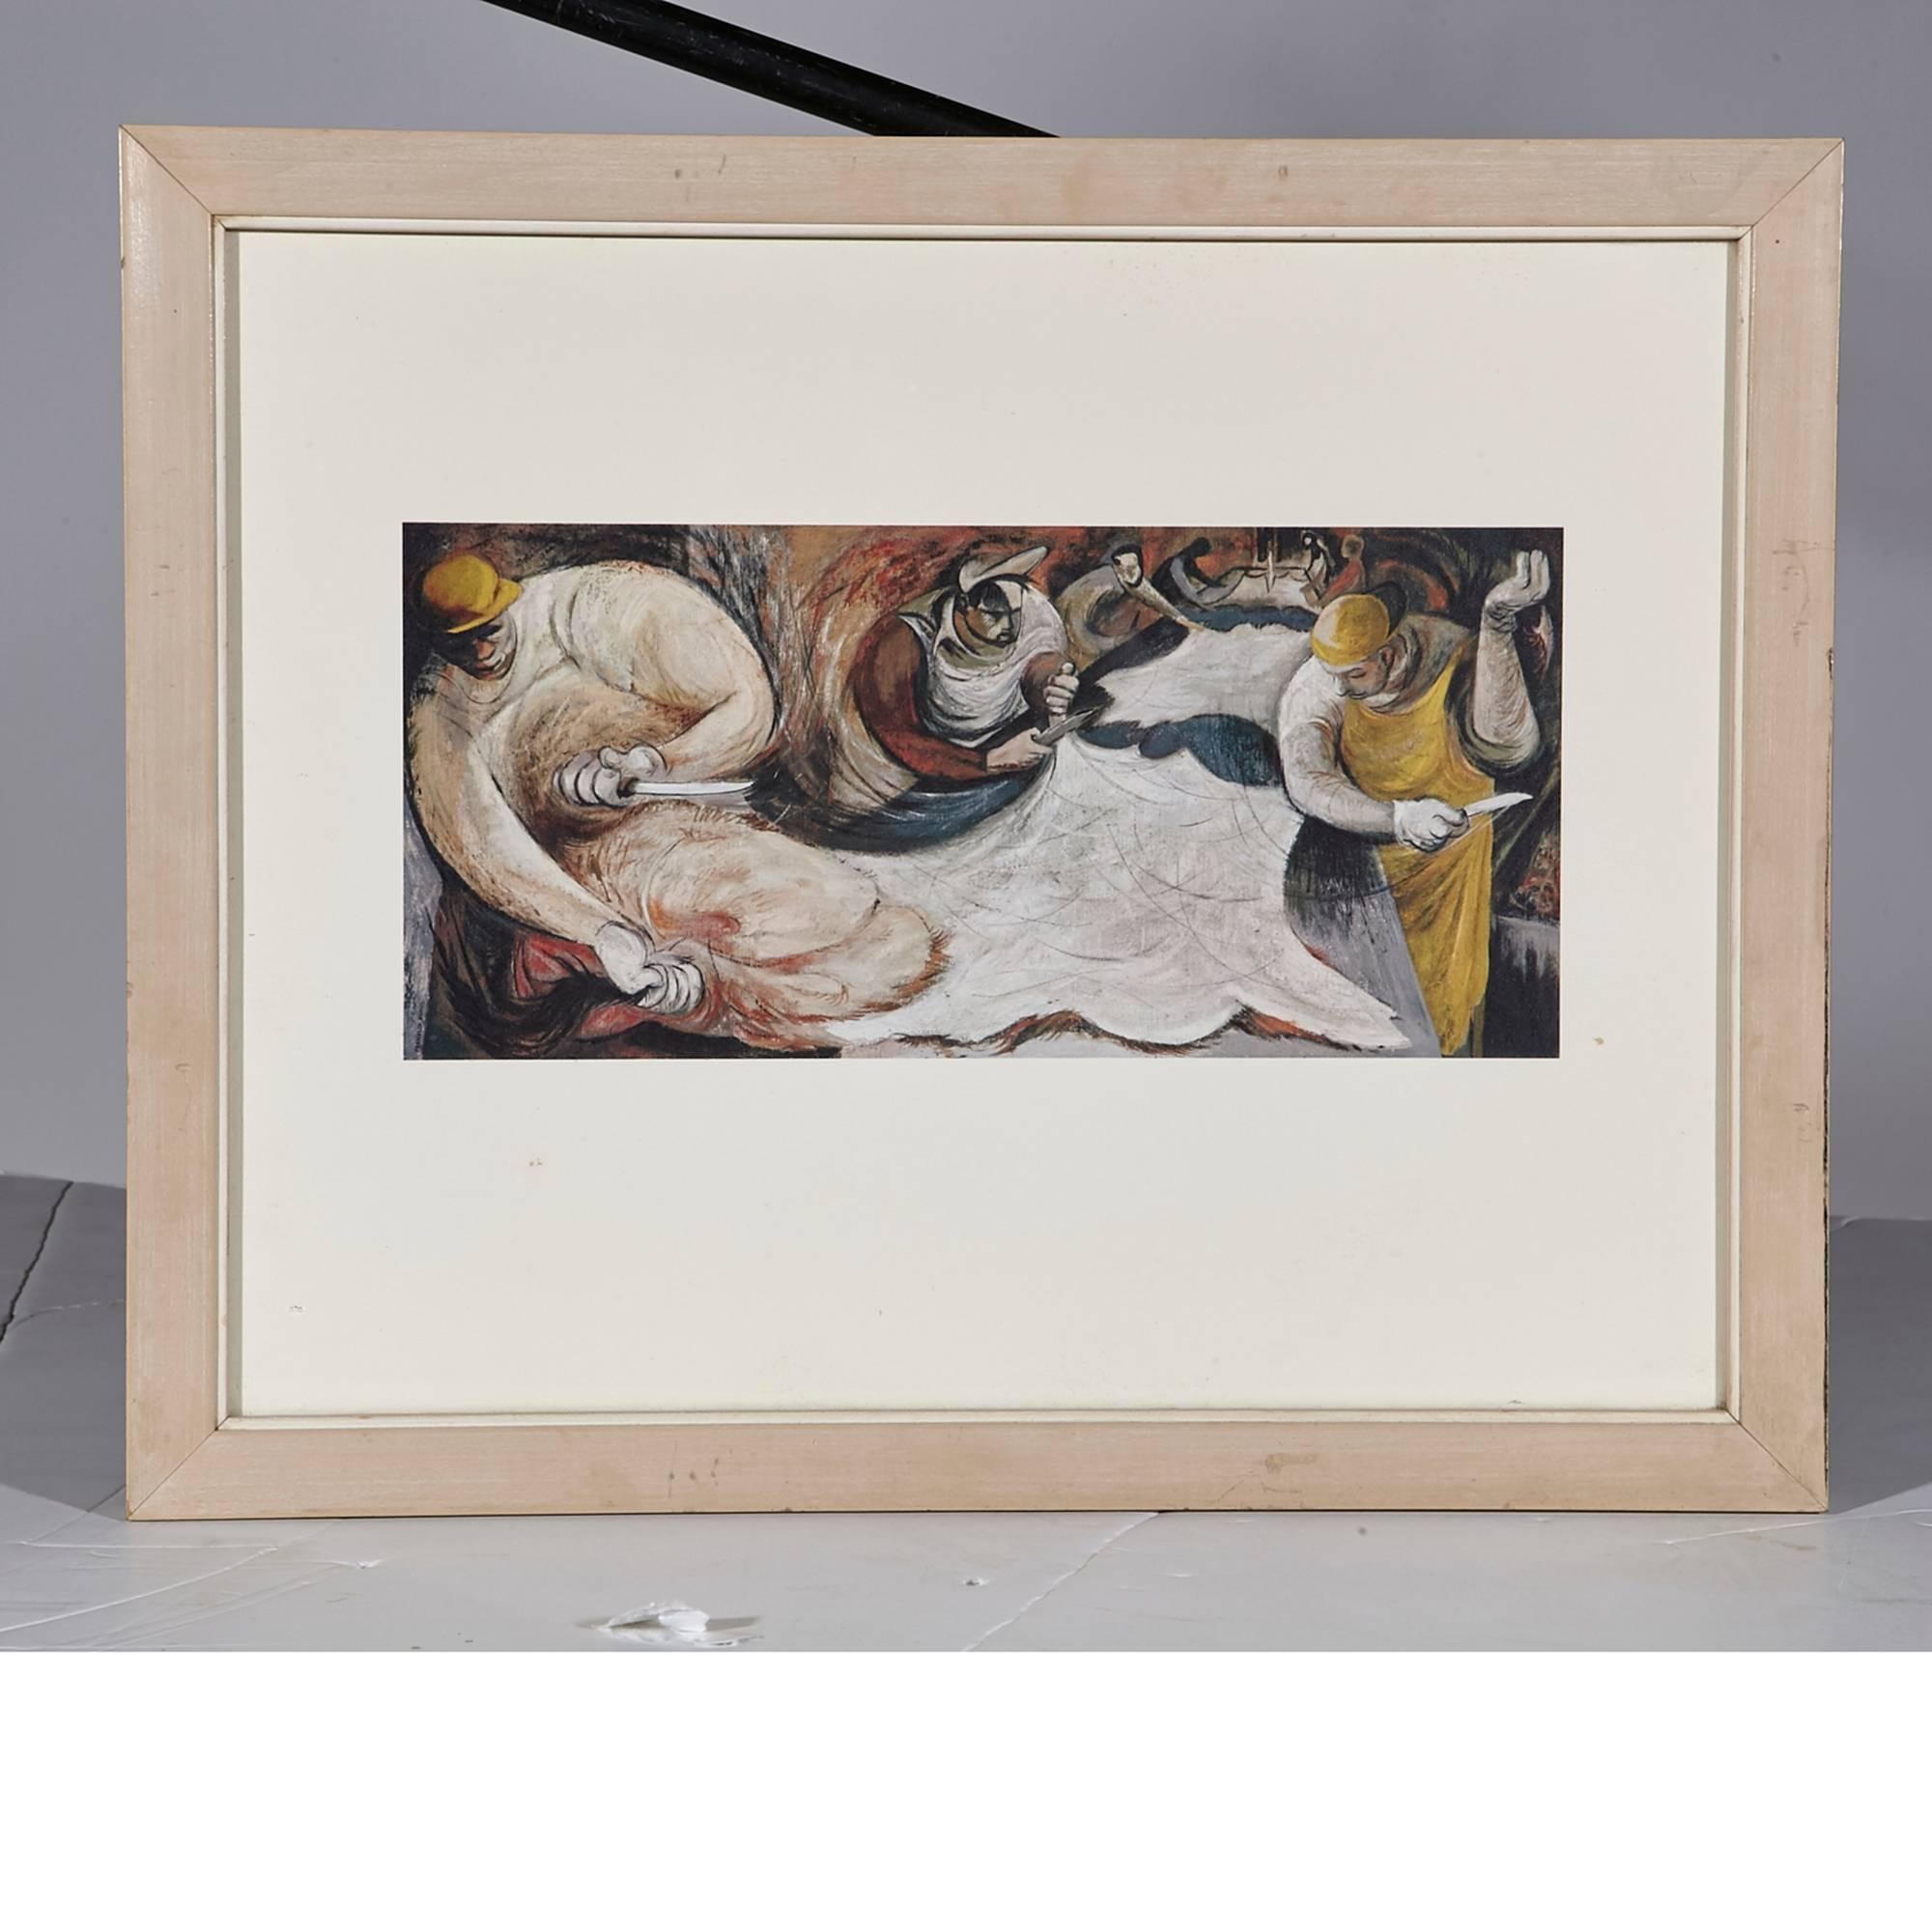 Artist Franklin Boggs leather tannery series of eight prints dated 1958. The series depicts different stages in the tannery process starting with removing the hide from the animal to the dying and drying stage. All the colors are bright and well